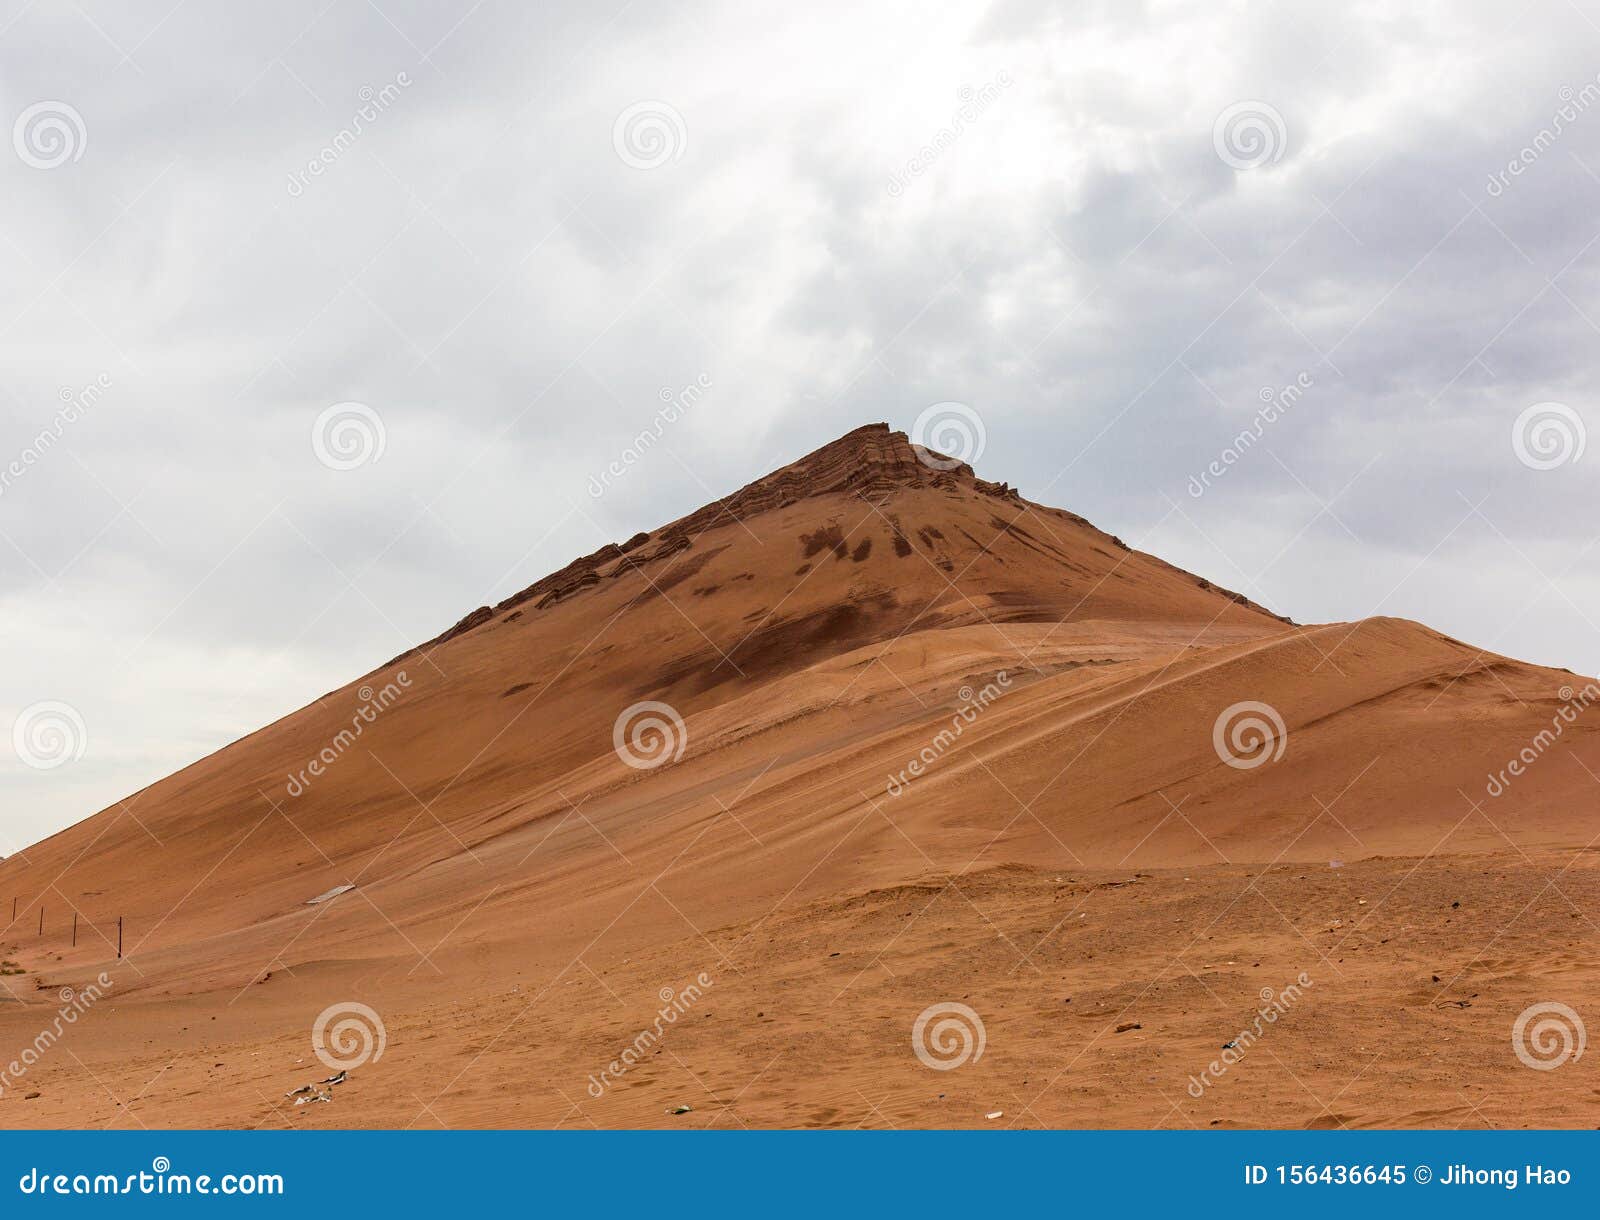 the flame mountain in the turpan area of xinjiang, the red mountain body, the grass is not born